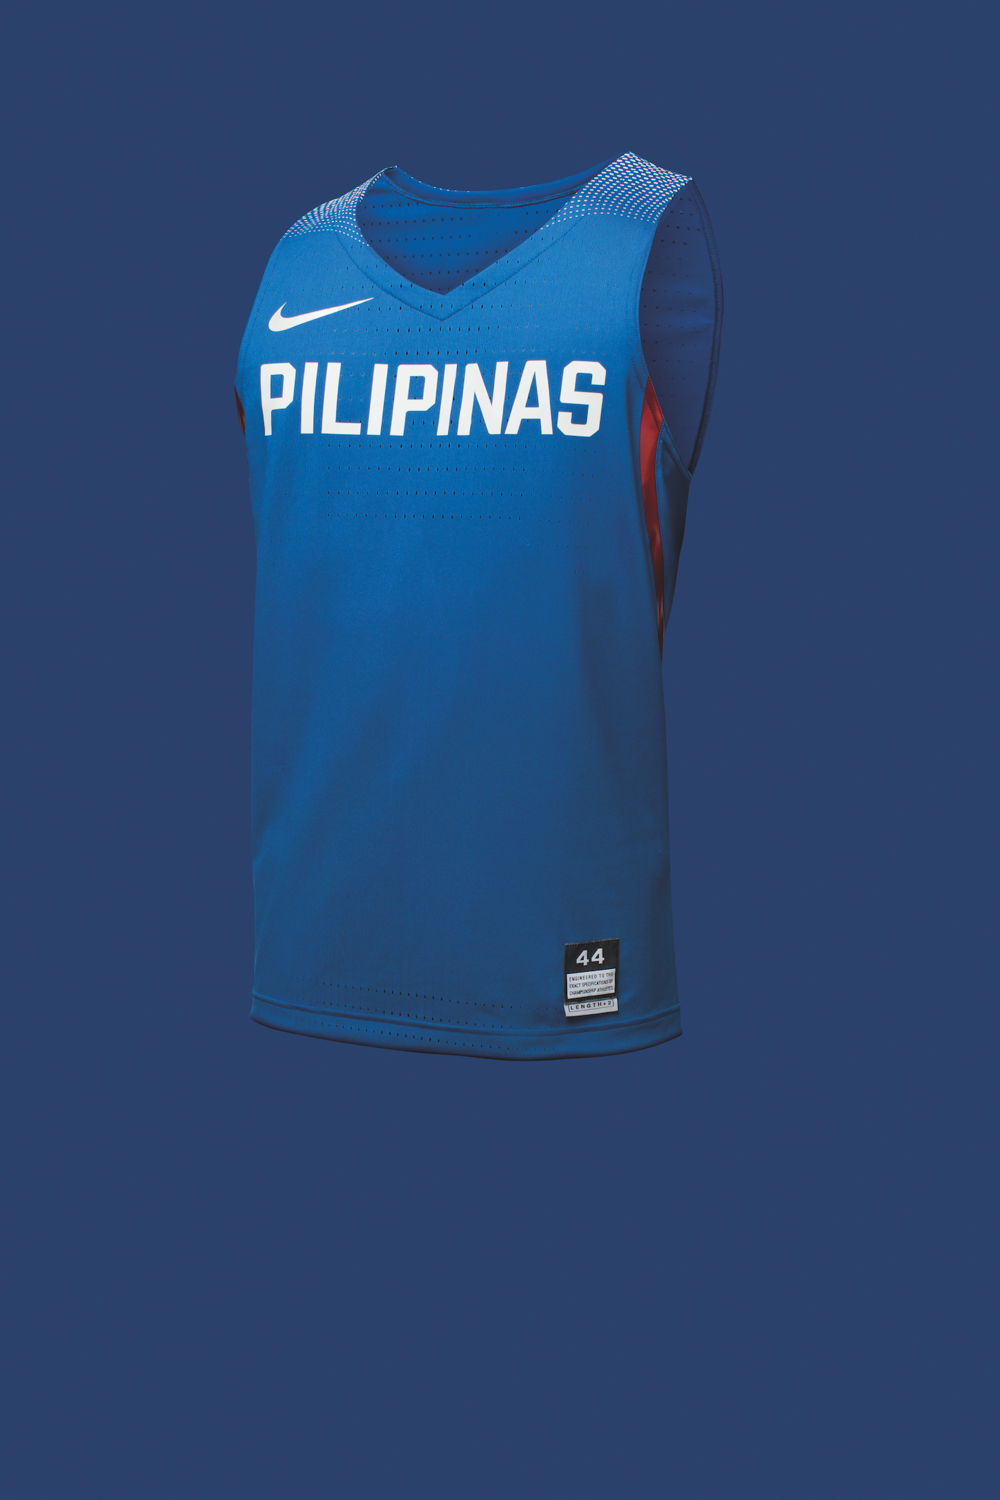 Gilas Pilipinas to debut 'lighter, tailored' Nike jerseys in Manila Olympic  qualifiers